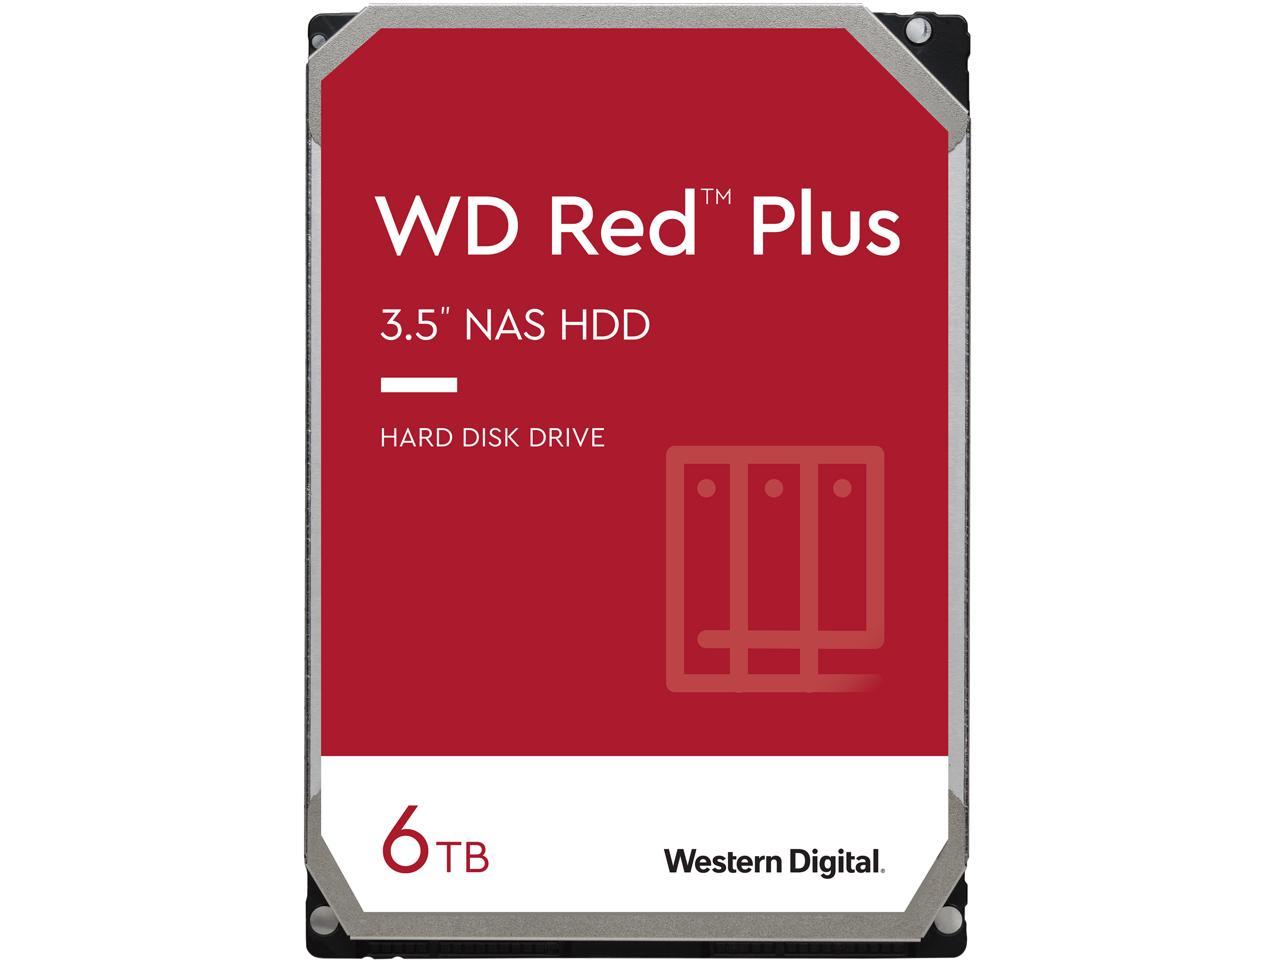 Wd Red Plus 6Tb Nas Hard Disk Drive - 5400 Rpm Class Sata 6Gb/S, Cmr, 64Mb Cache, 3.5 Inch - Wd60Efrx